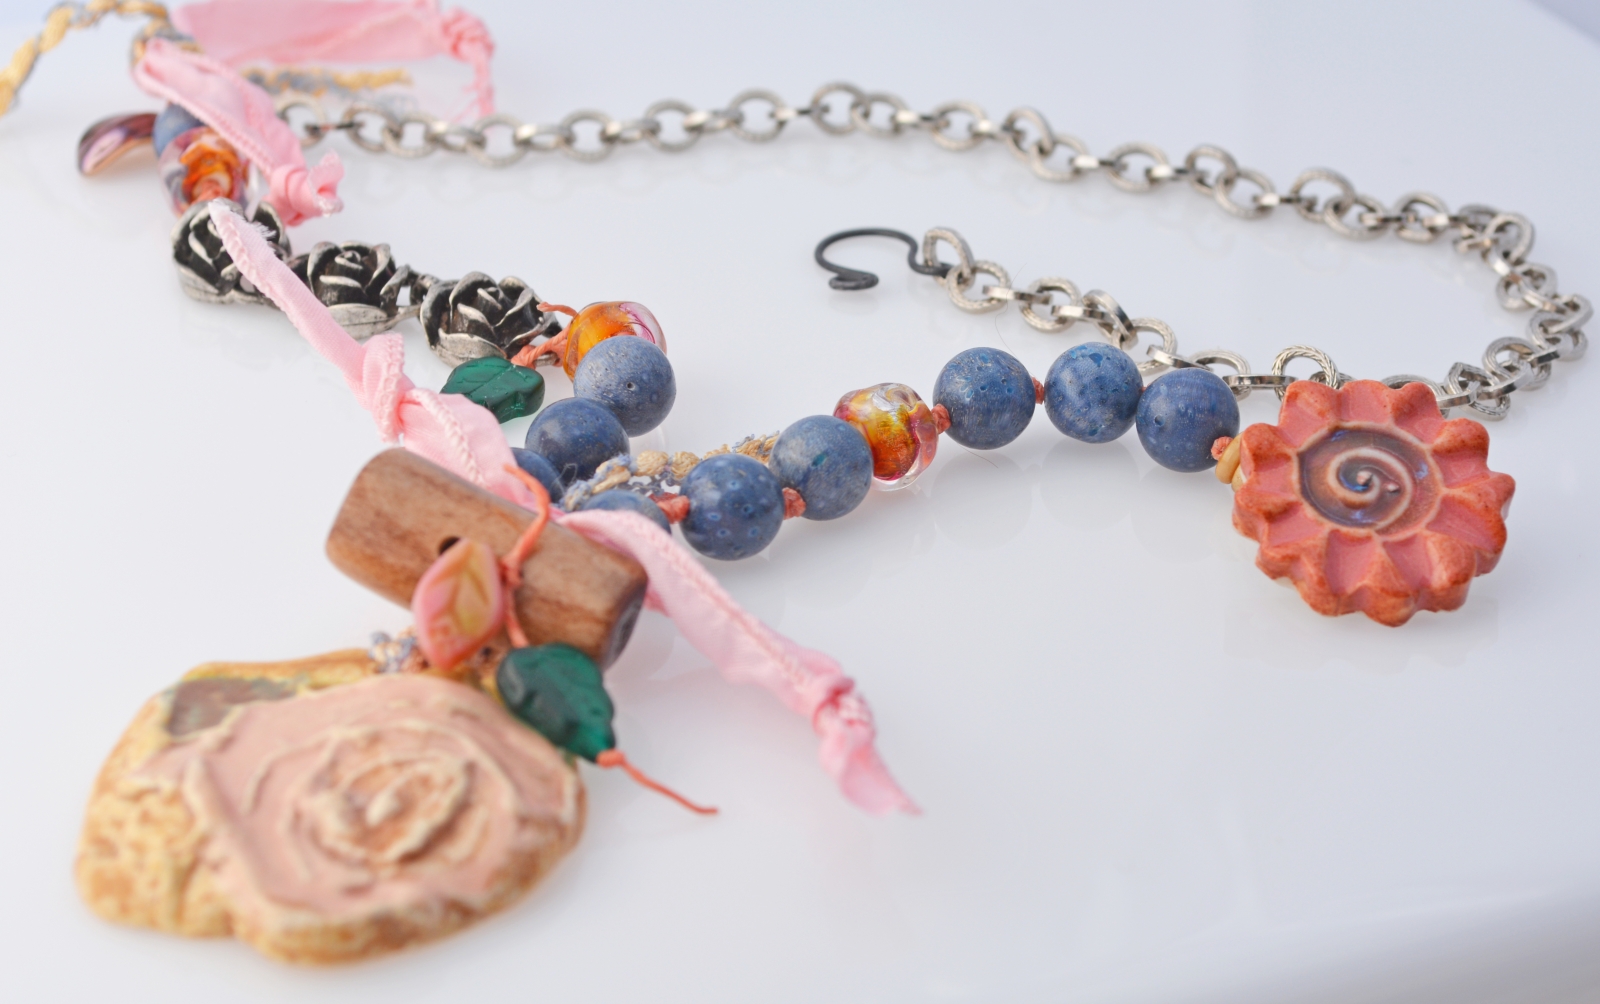 Shabby Chic Rose necklace